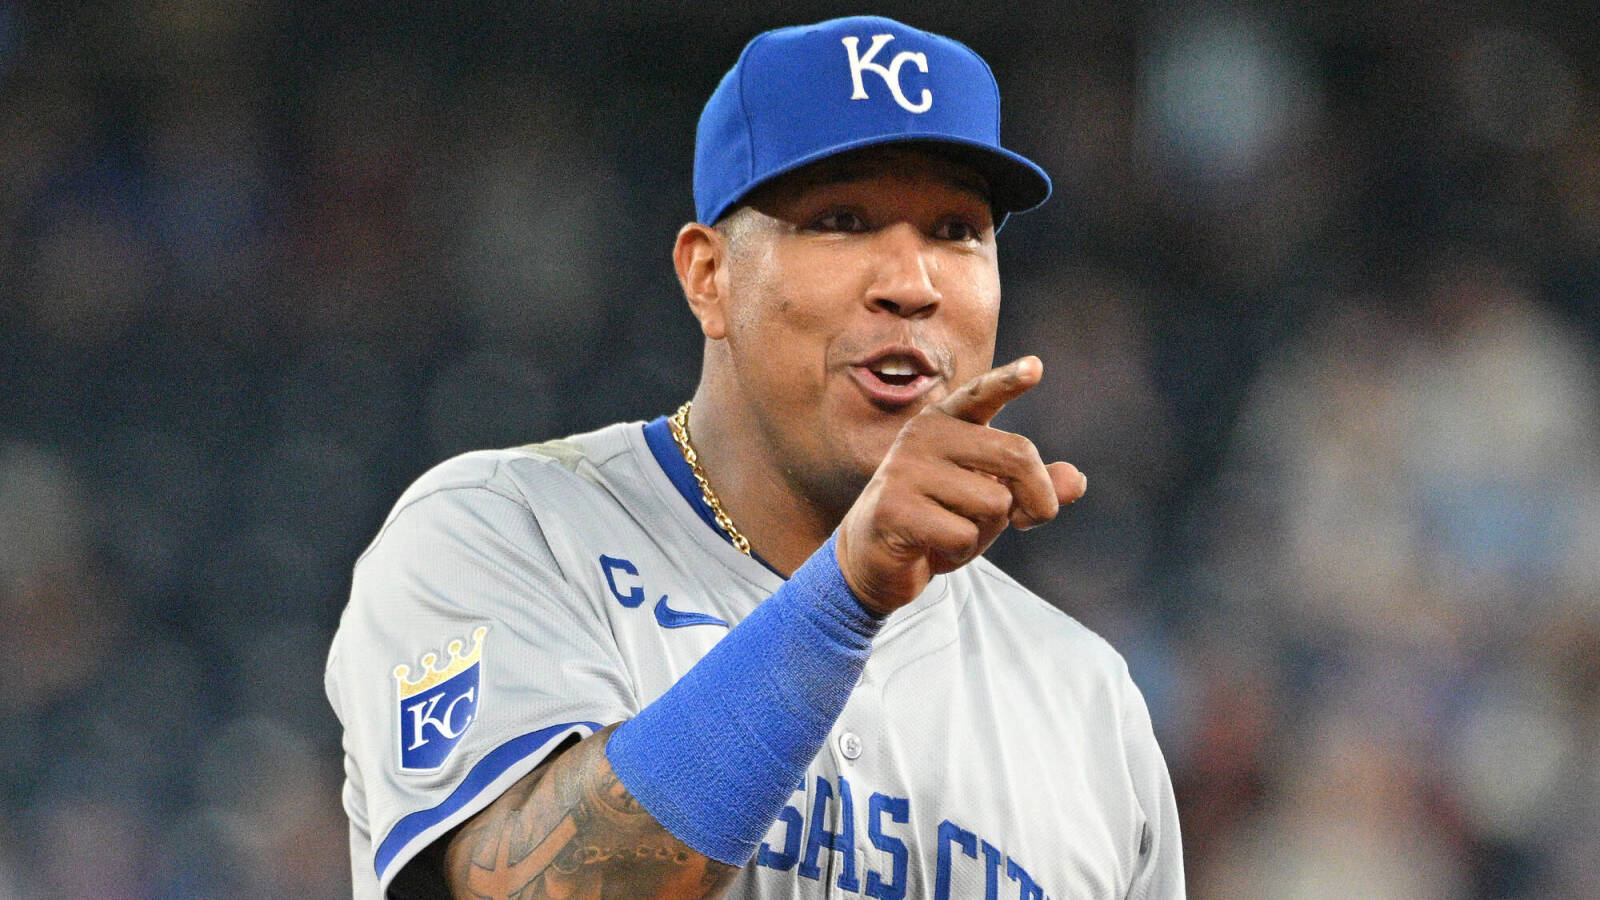 Salvador Perez Has the Chance to Bolster His Hall of Fame Case